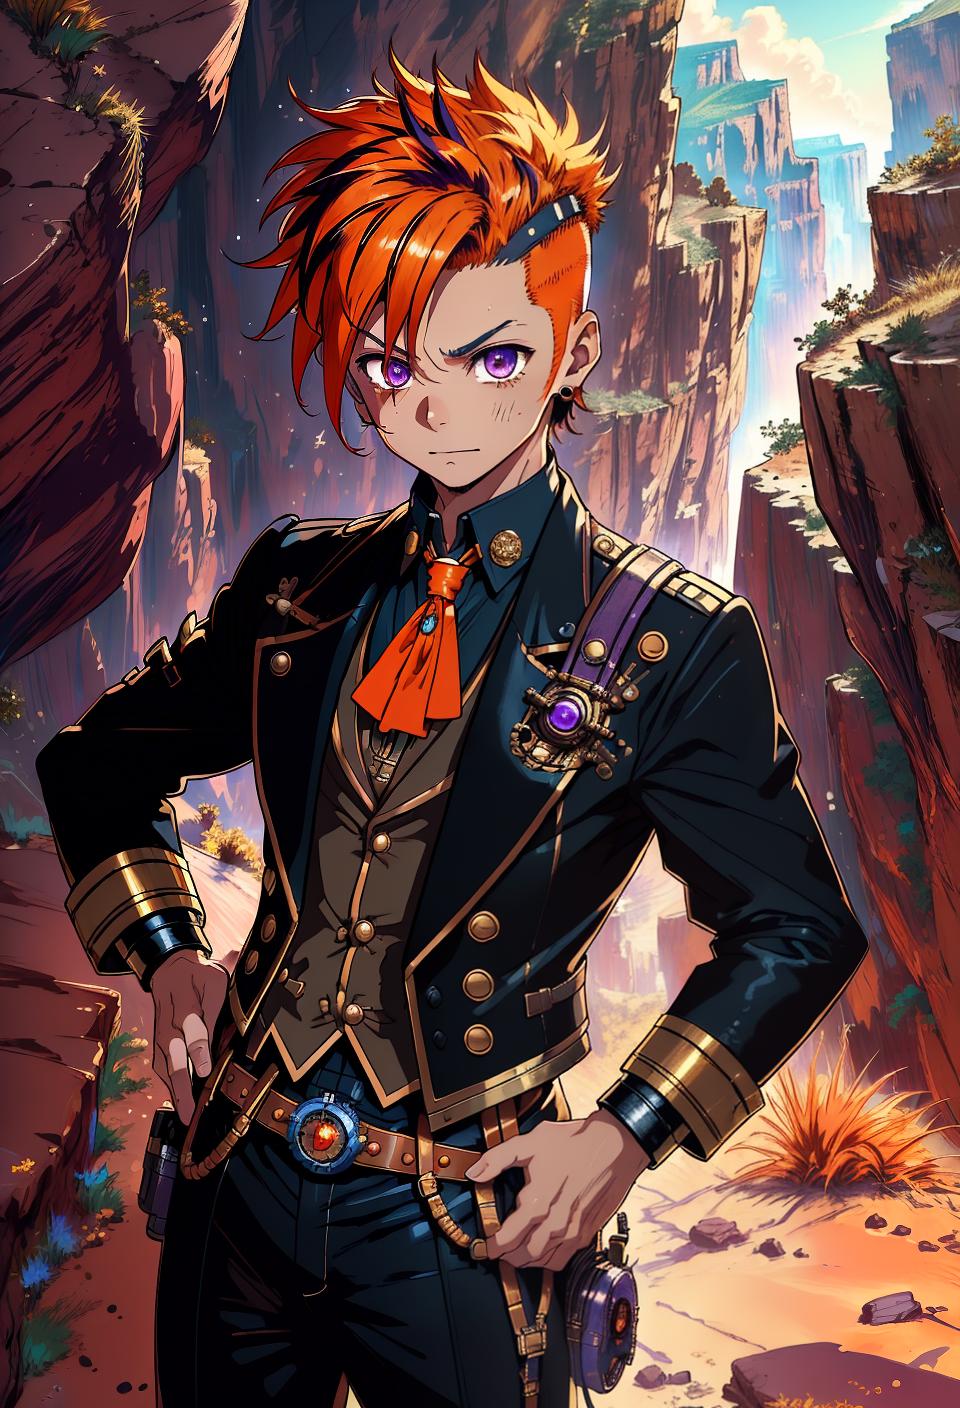  ((trending, highres, masterpiece, cinematic shot)), 1boy, chibi, male steampunk outfit, Grand Canyon scene, short messy orange hair, mohawk hairstyle, large purple eyes, neurotic personality, happy expression, tanned skin, magical, toned